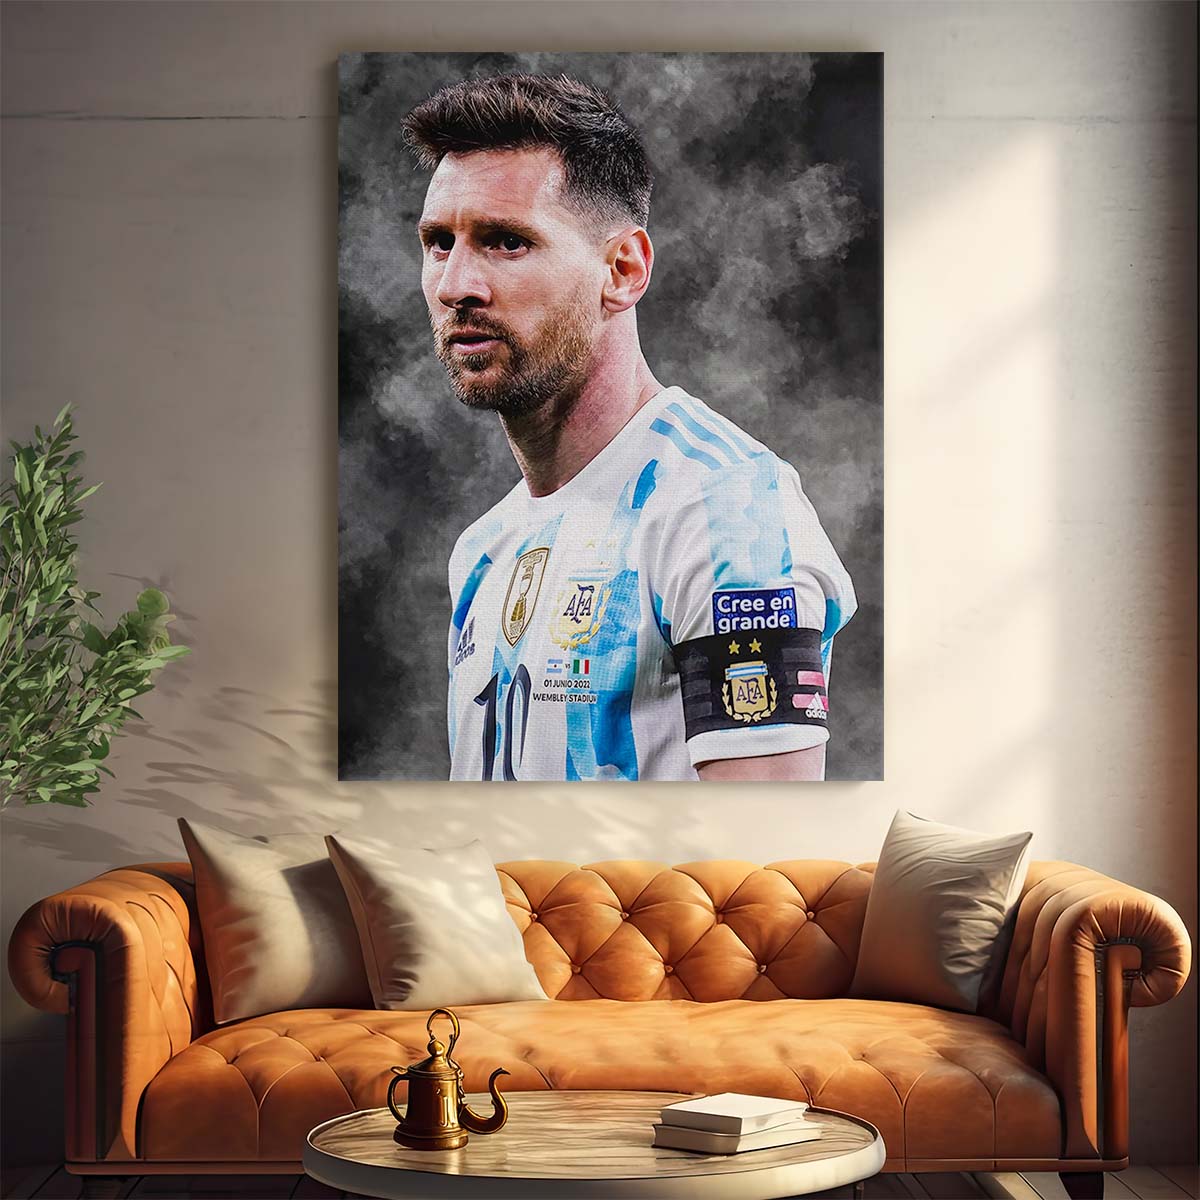 Lionel Messi Portrait Argentine Captain World Cup Wall Art by Luxuriance Designs. Made in USA.